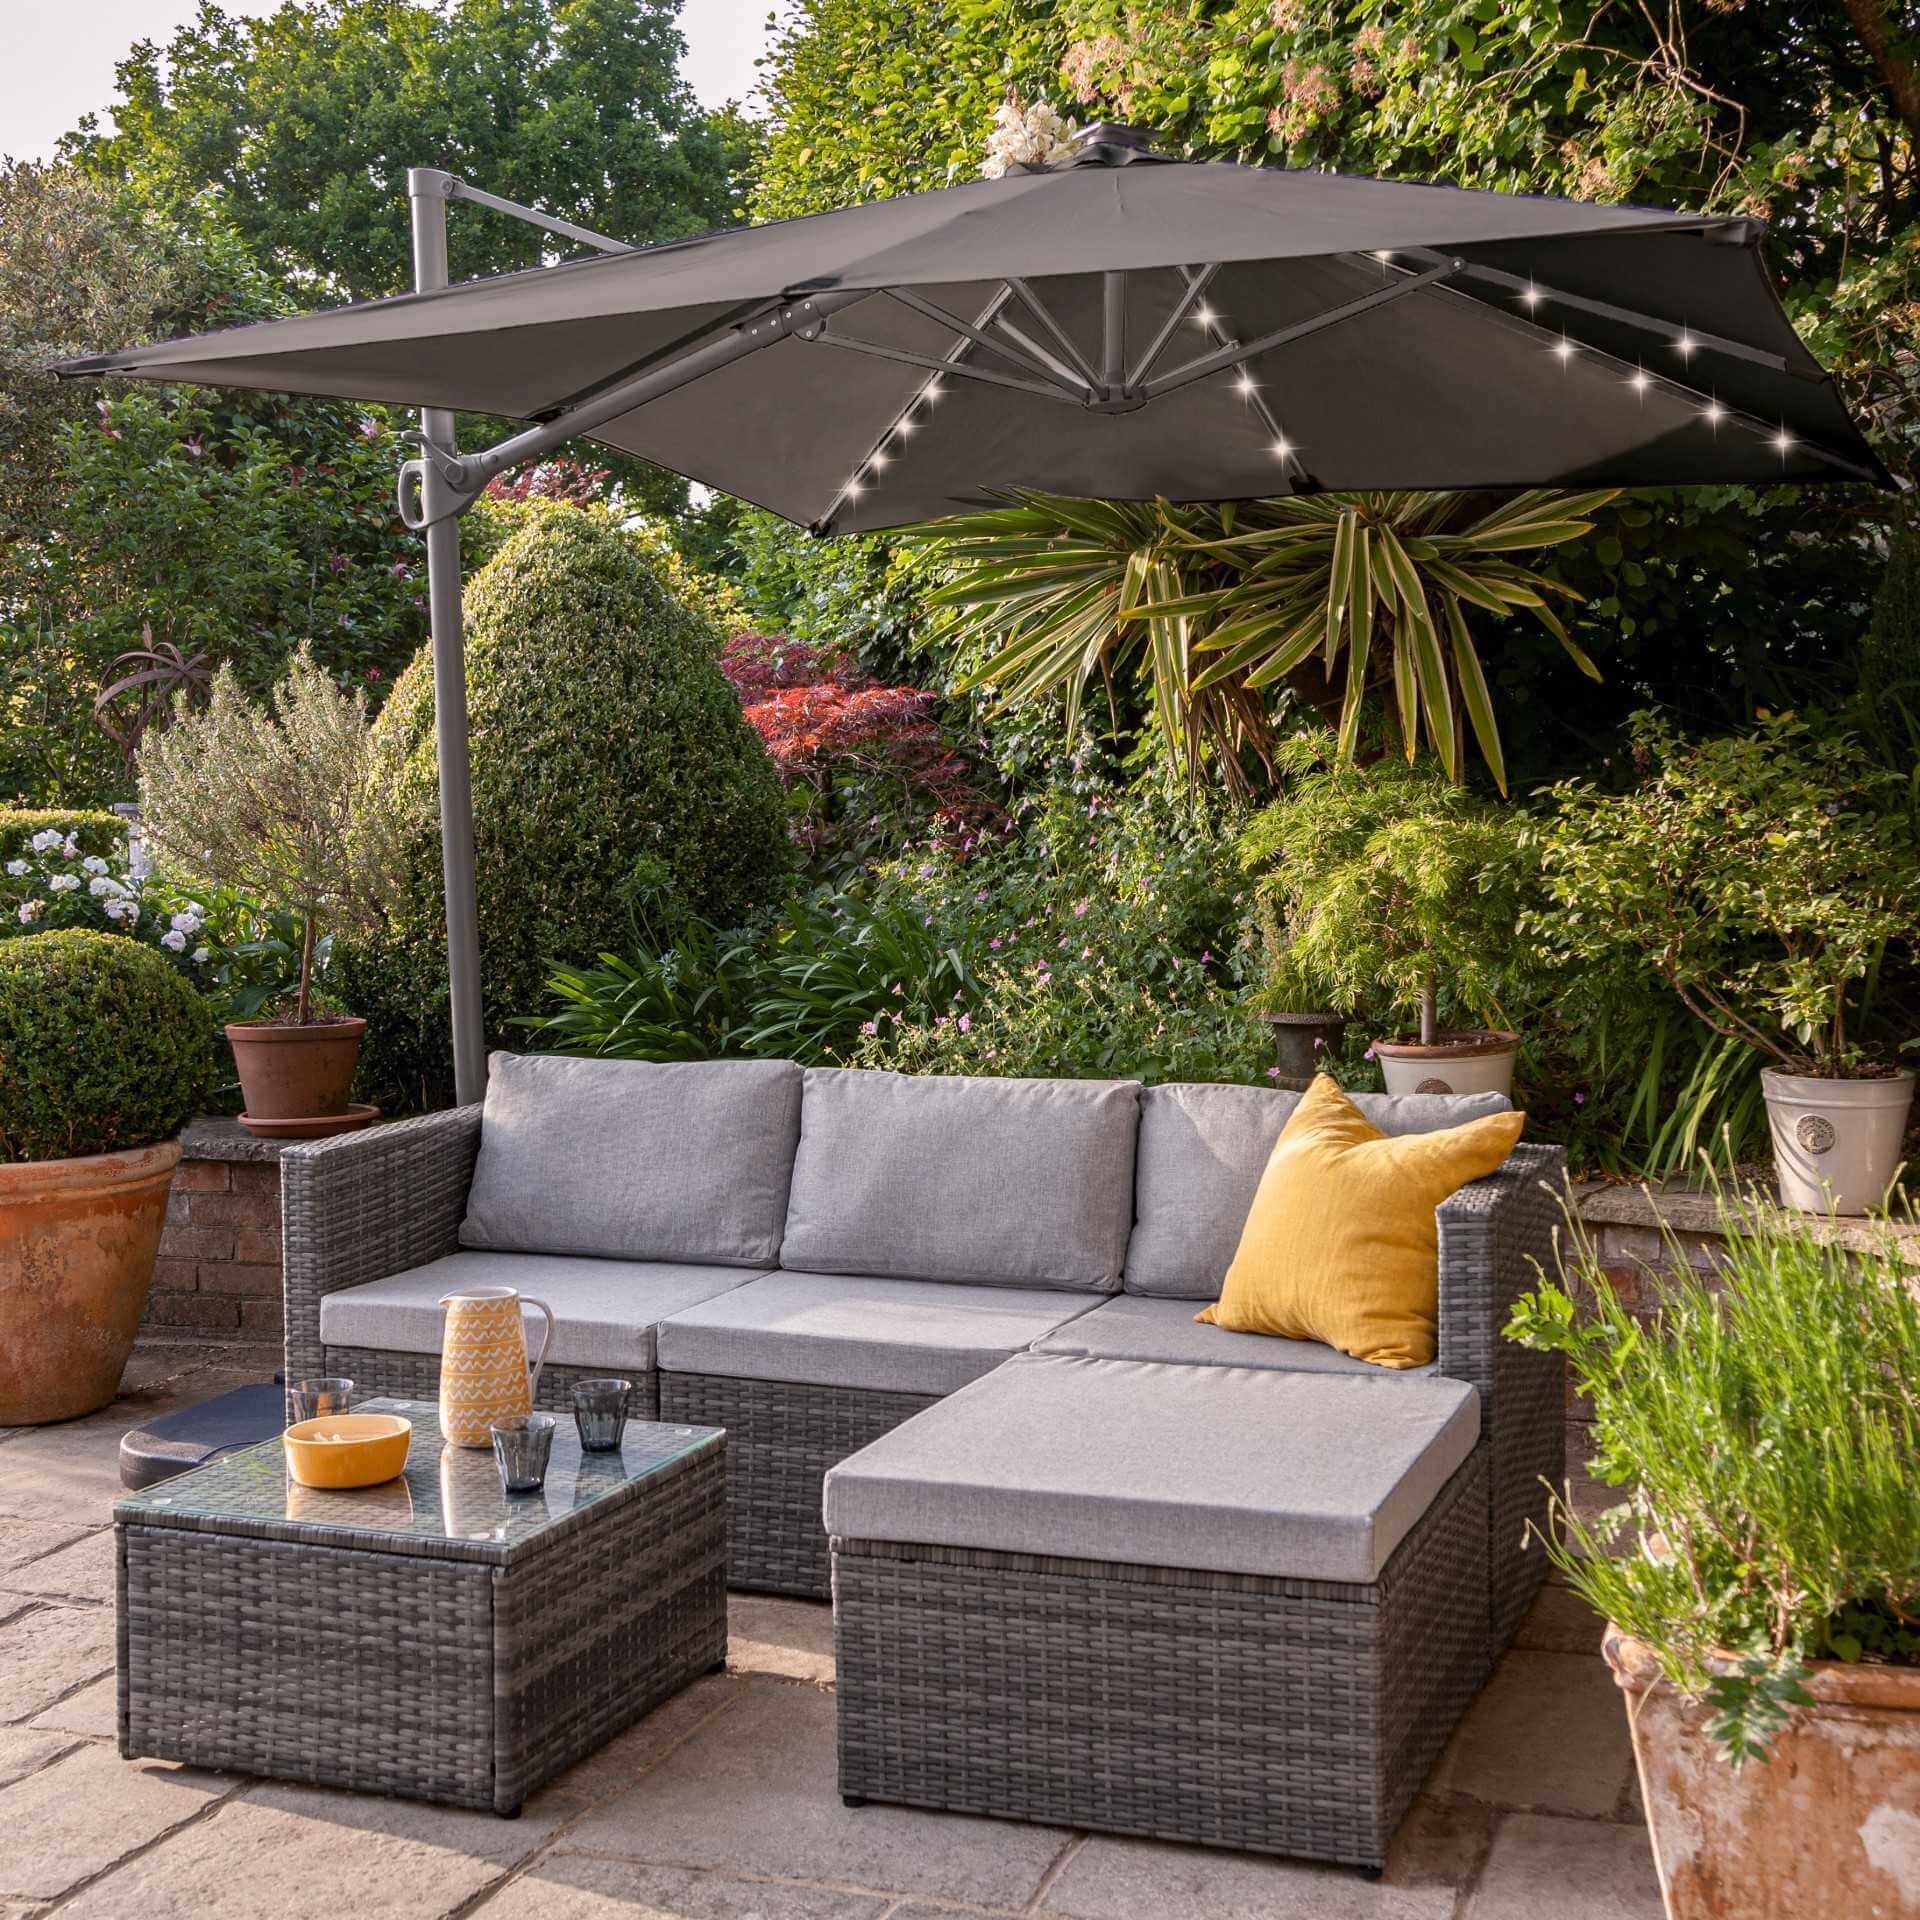 Weston 4 Seater Rattan Corner Sofa Set with LED Cantilever Parasol and Base - Grey Weave